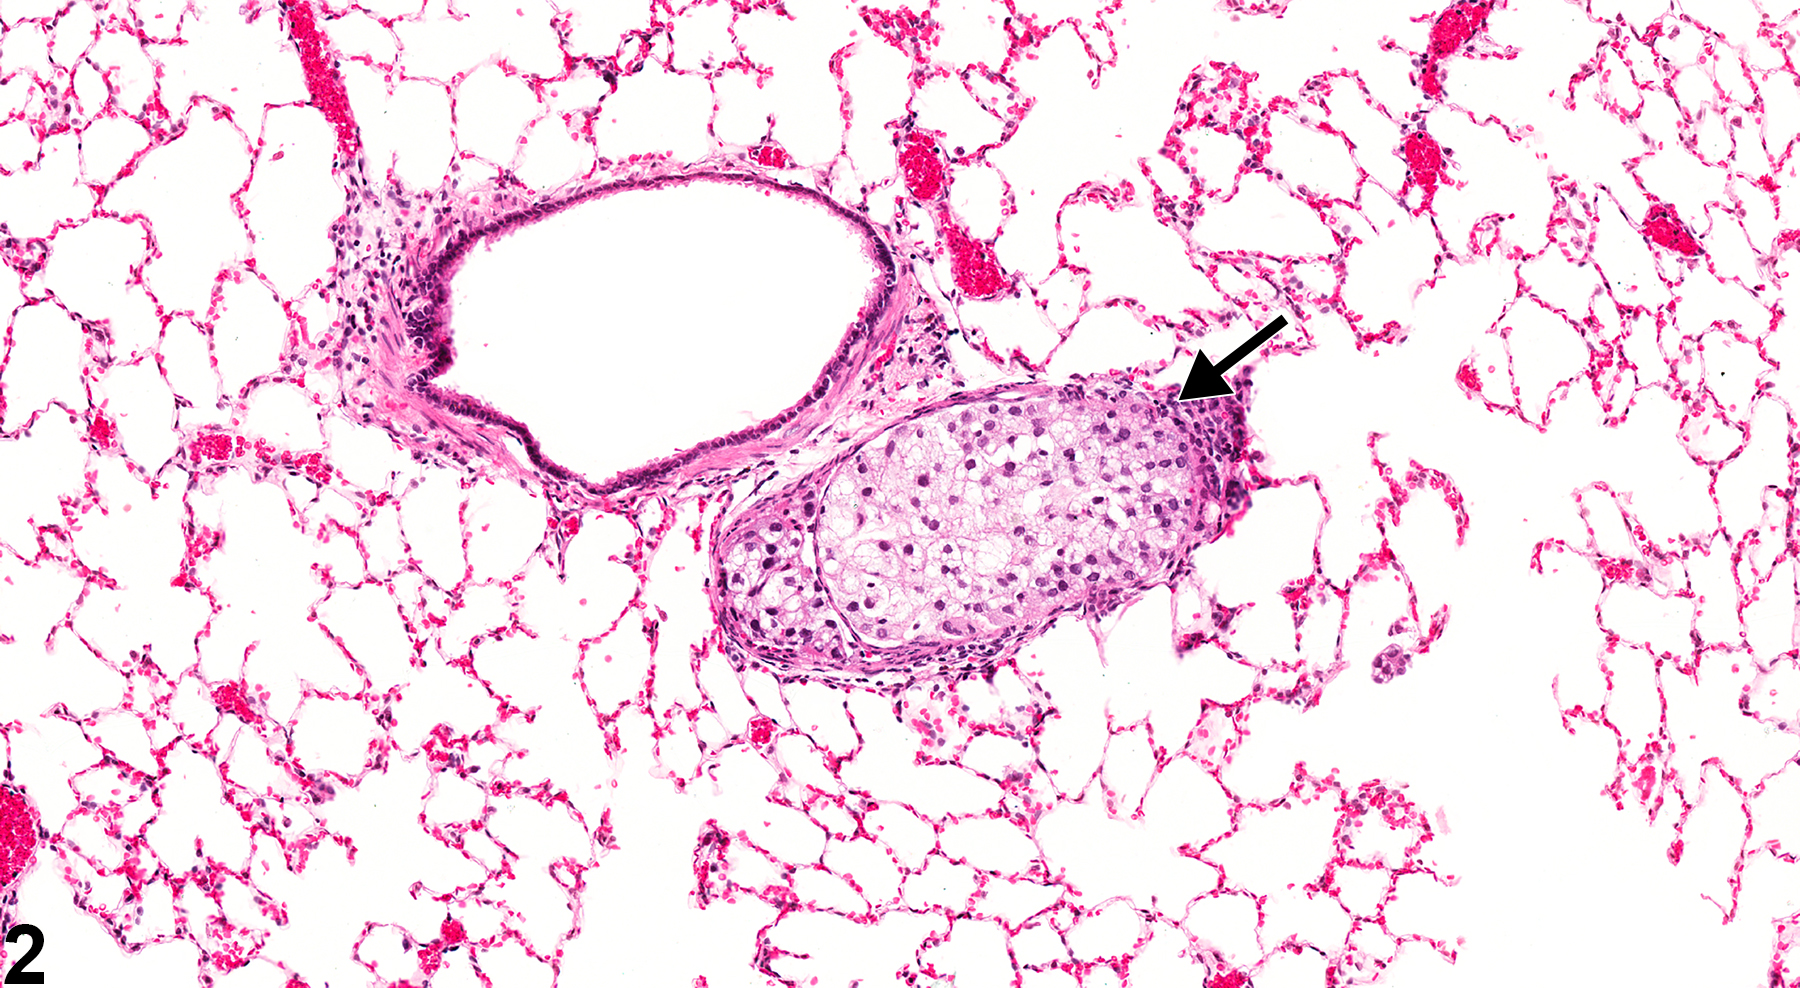 Image of embolus in the lung, artery from a male F344/N rat in a chronic study